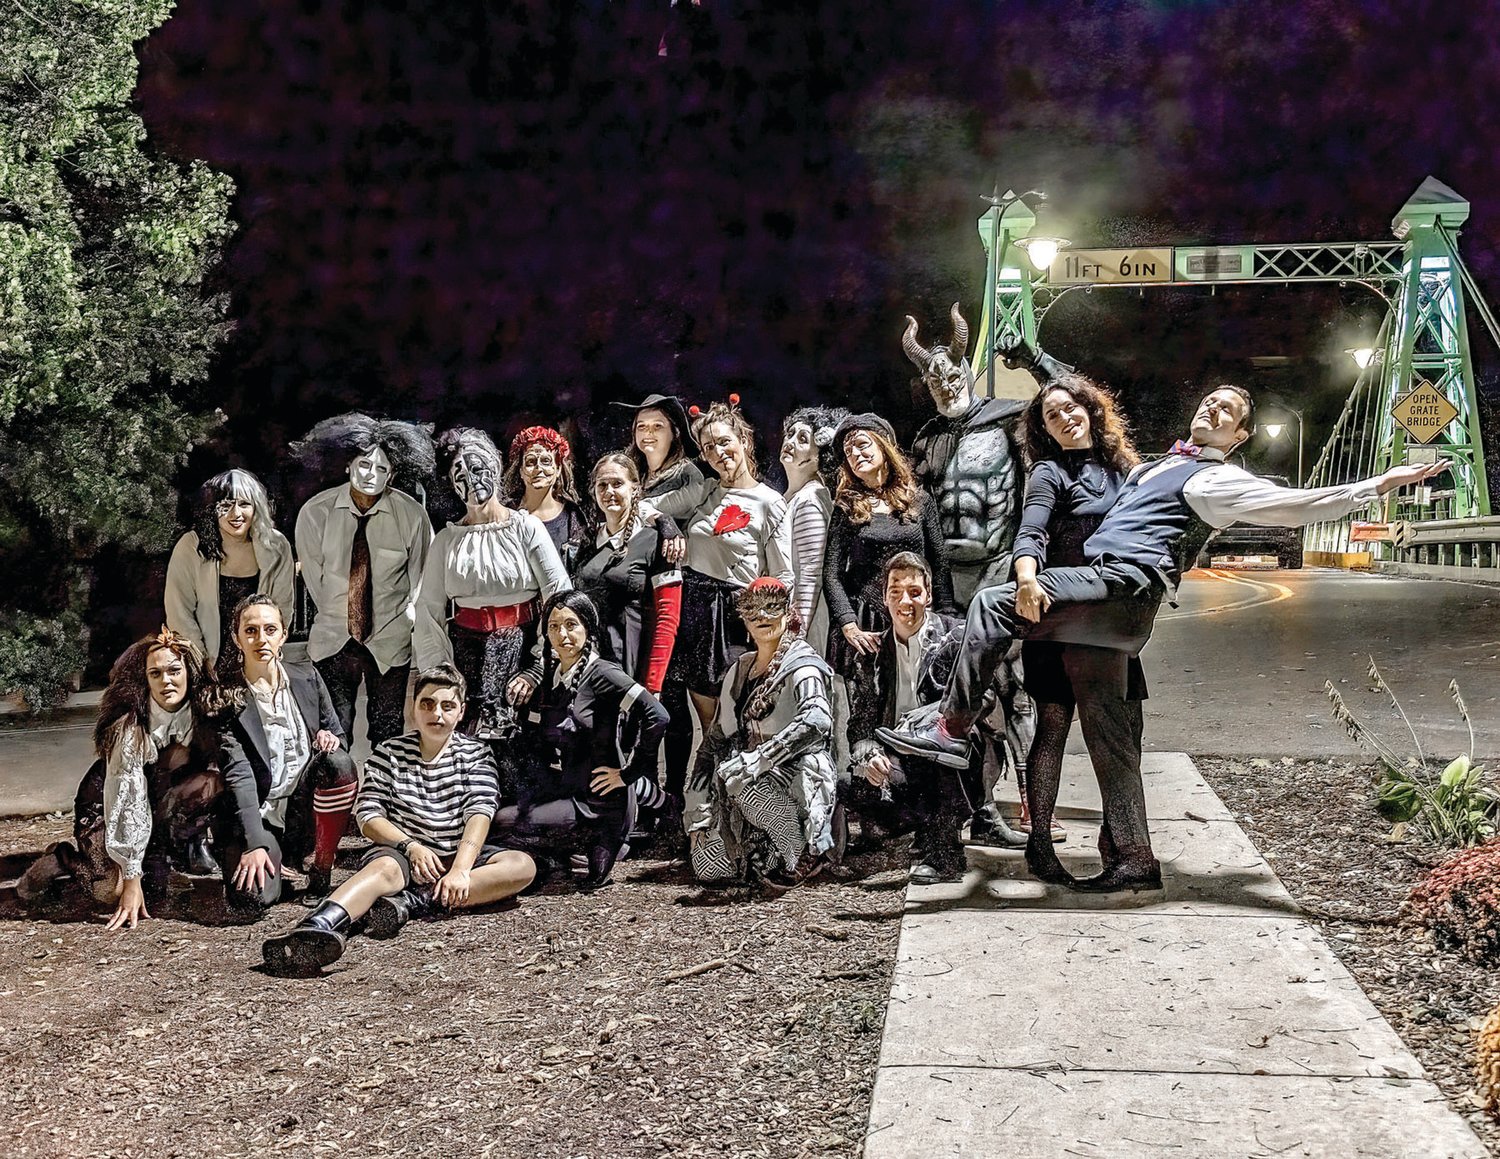 Riegelsville flash mob dancers, a medley of Monster Mash, Addams Family, Timewarp, and Thriller, gathered near the Riegelsville Bridge on Halloween night to spread holiday cheer. The group’s first flash mob was in 2019 and there were approximately 300 trick-or-treaters in the street at the time of the event.